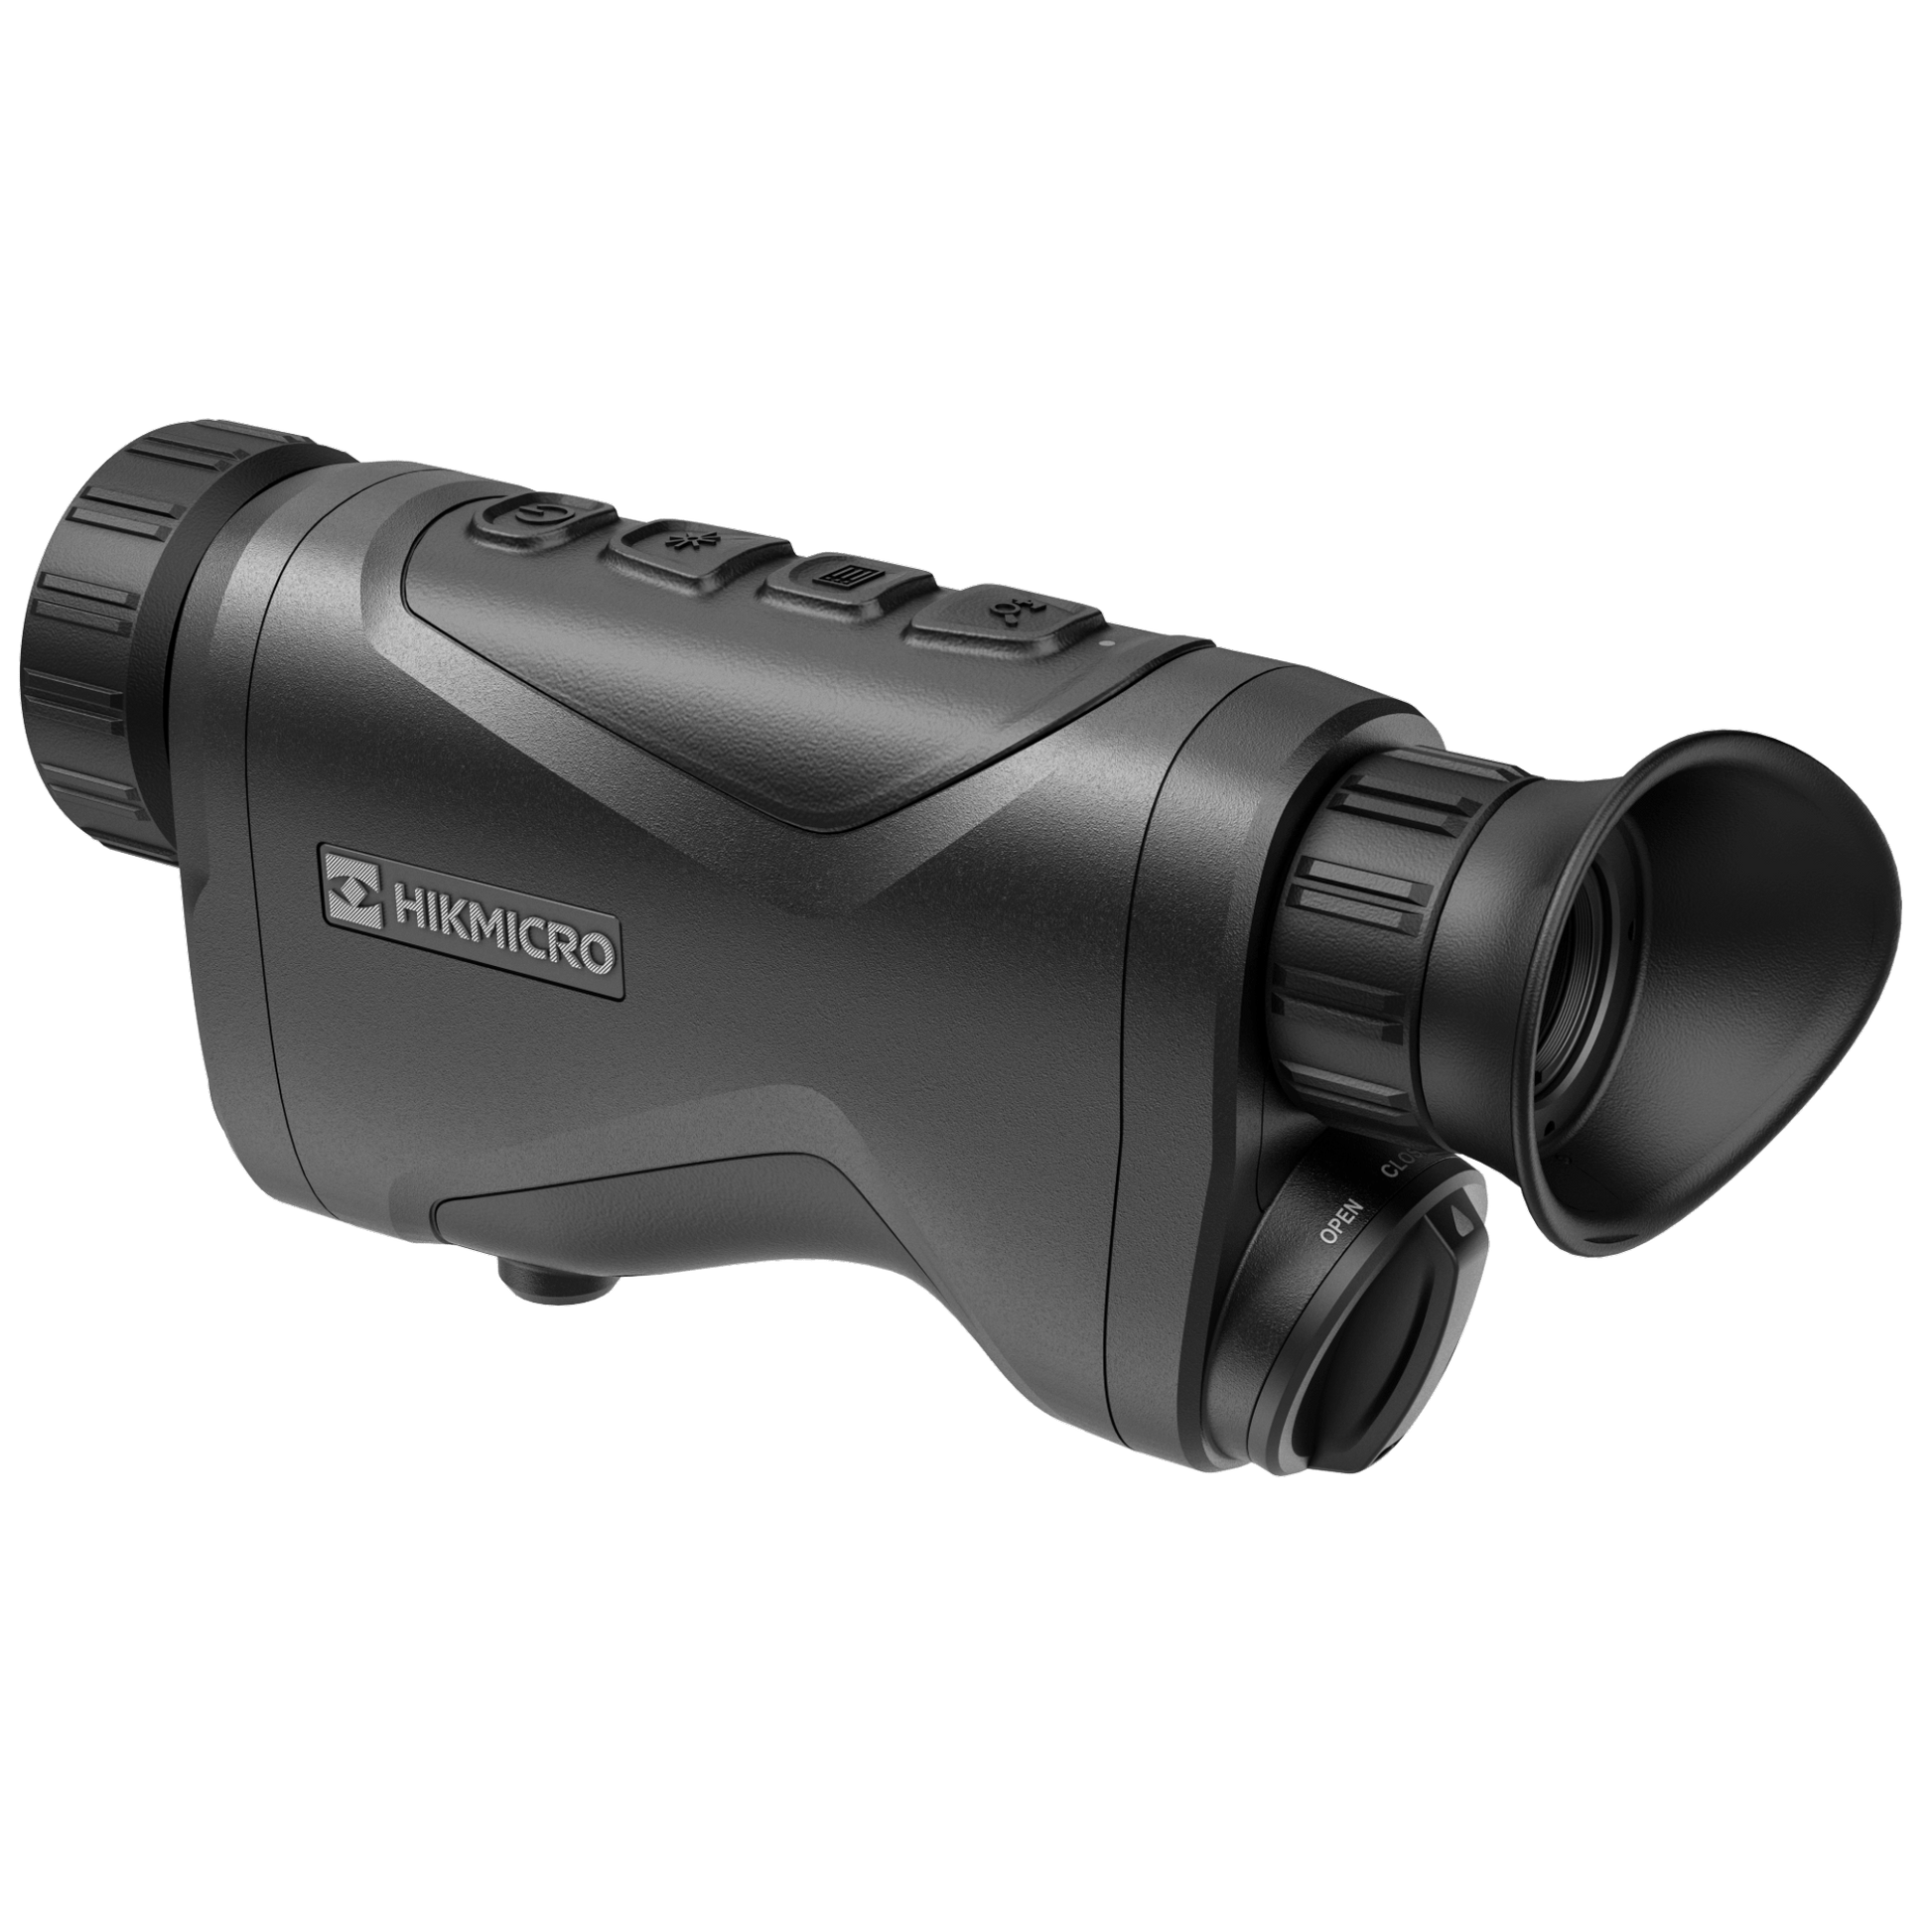 Rear view of the HikMicro Condor CQ35L thermal monocular, displaying its control buttons and HikMicro logo. The device's eyepiece is prominently shown, and its  ergonomic design is accentuated with a focus ring near the eyepiece for precision adjustments. The black matte finish signifies its durable construction suited for hunting and security applications.